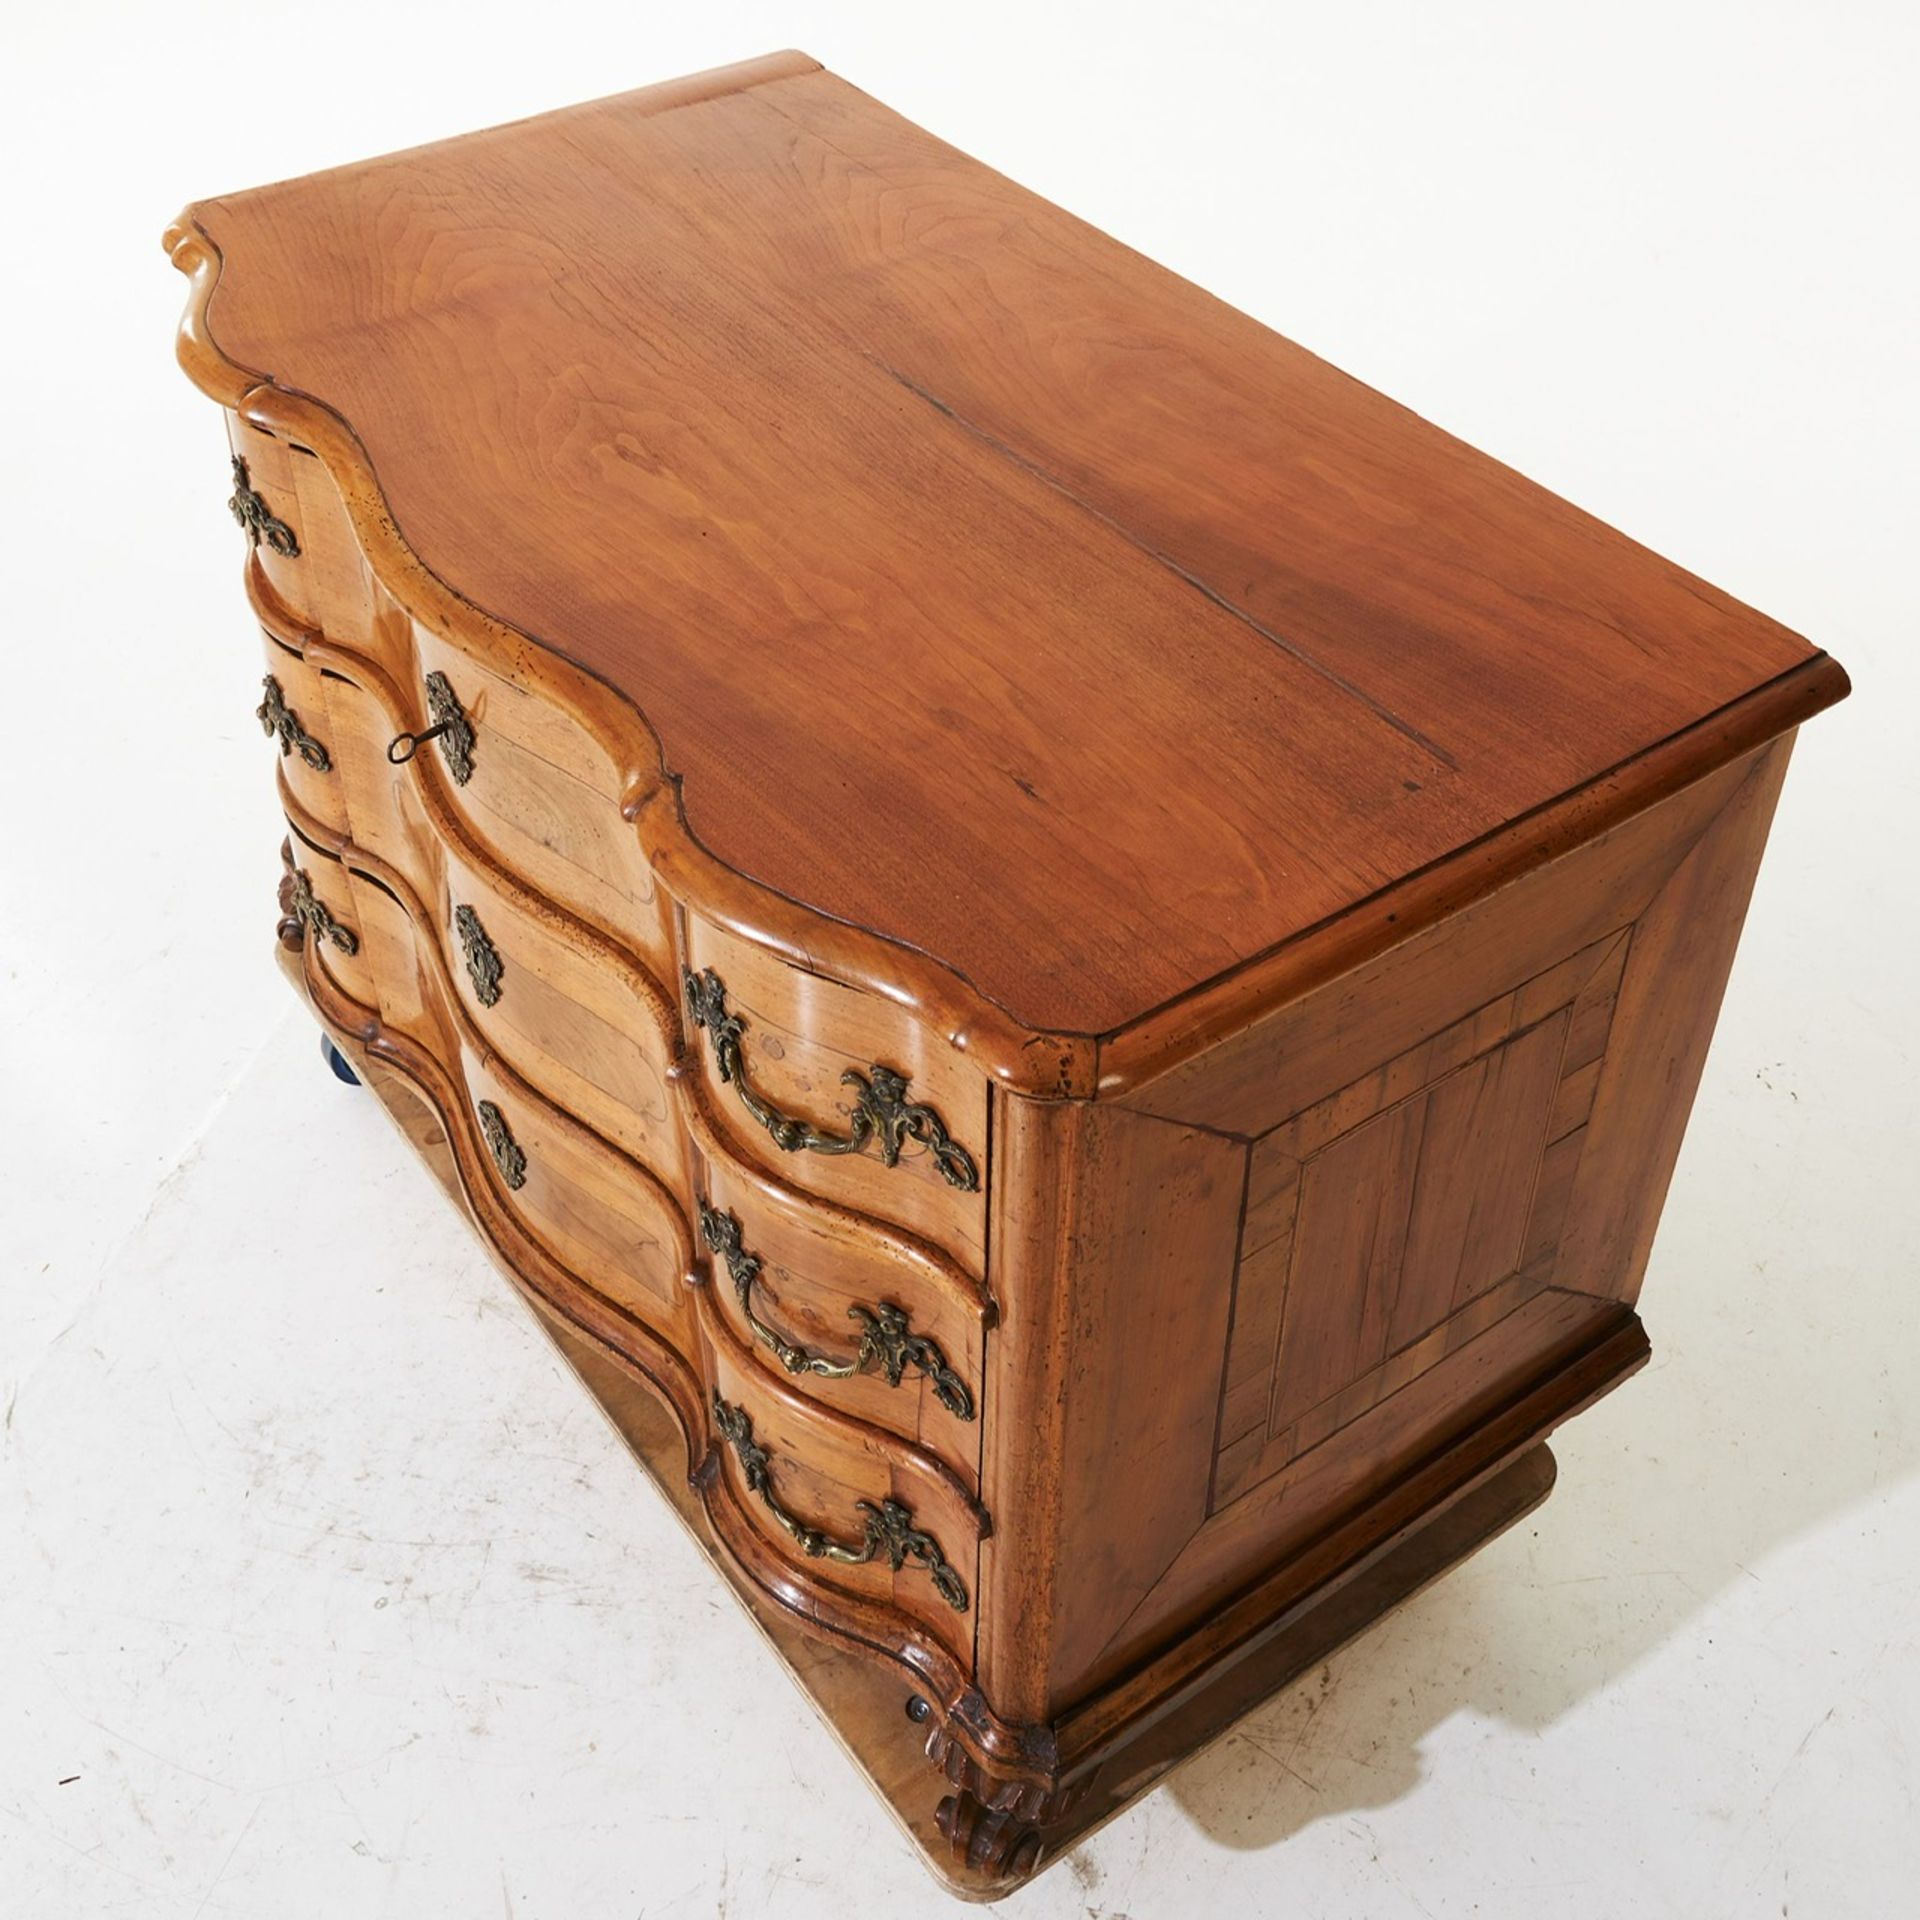 AN 18TH CENTURY ITALIAN WALNUT SERPENTINE CHEST OF DRAWERS - Image 8 of 8